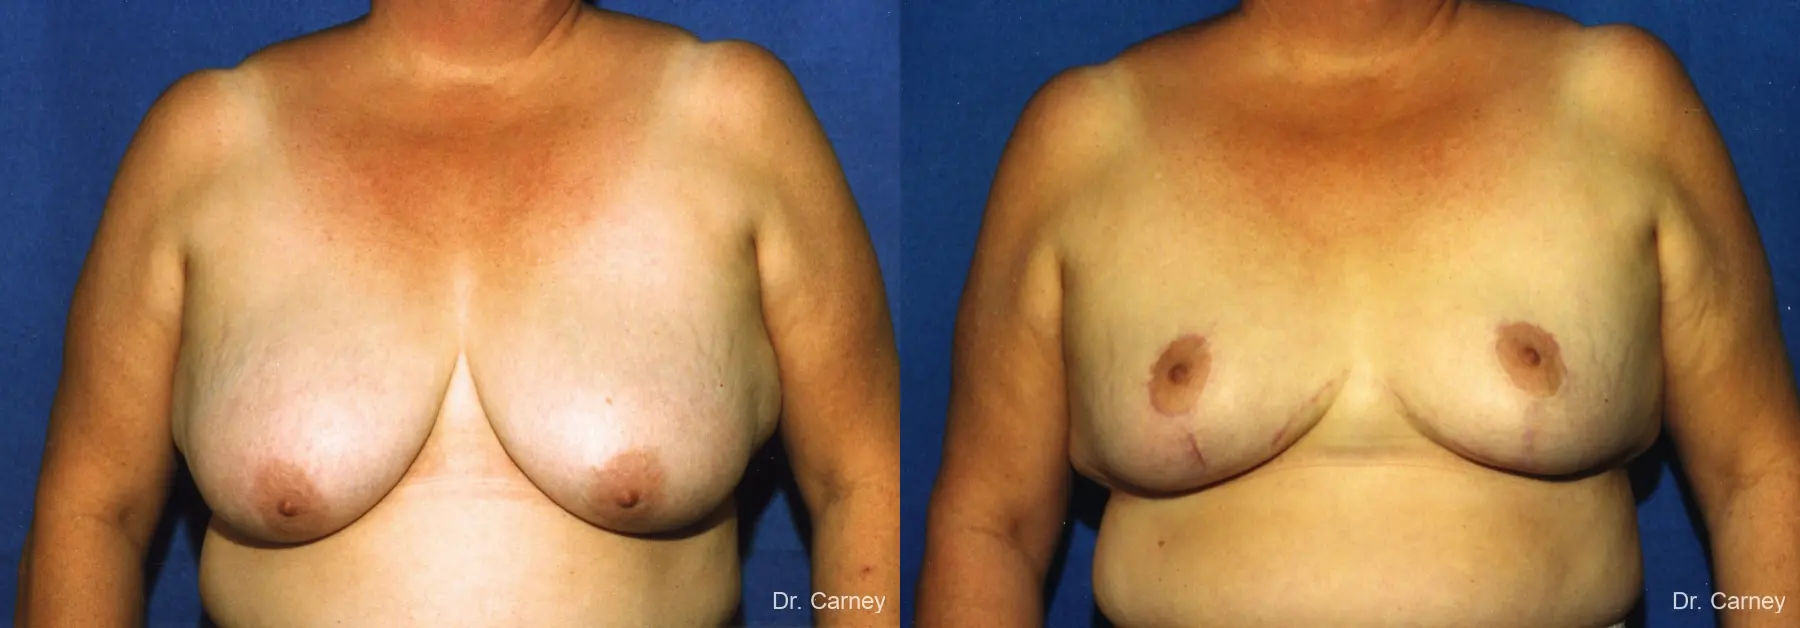 Virginia Beach Breast Lift 1186 - Before and After